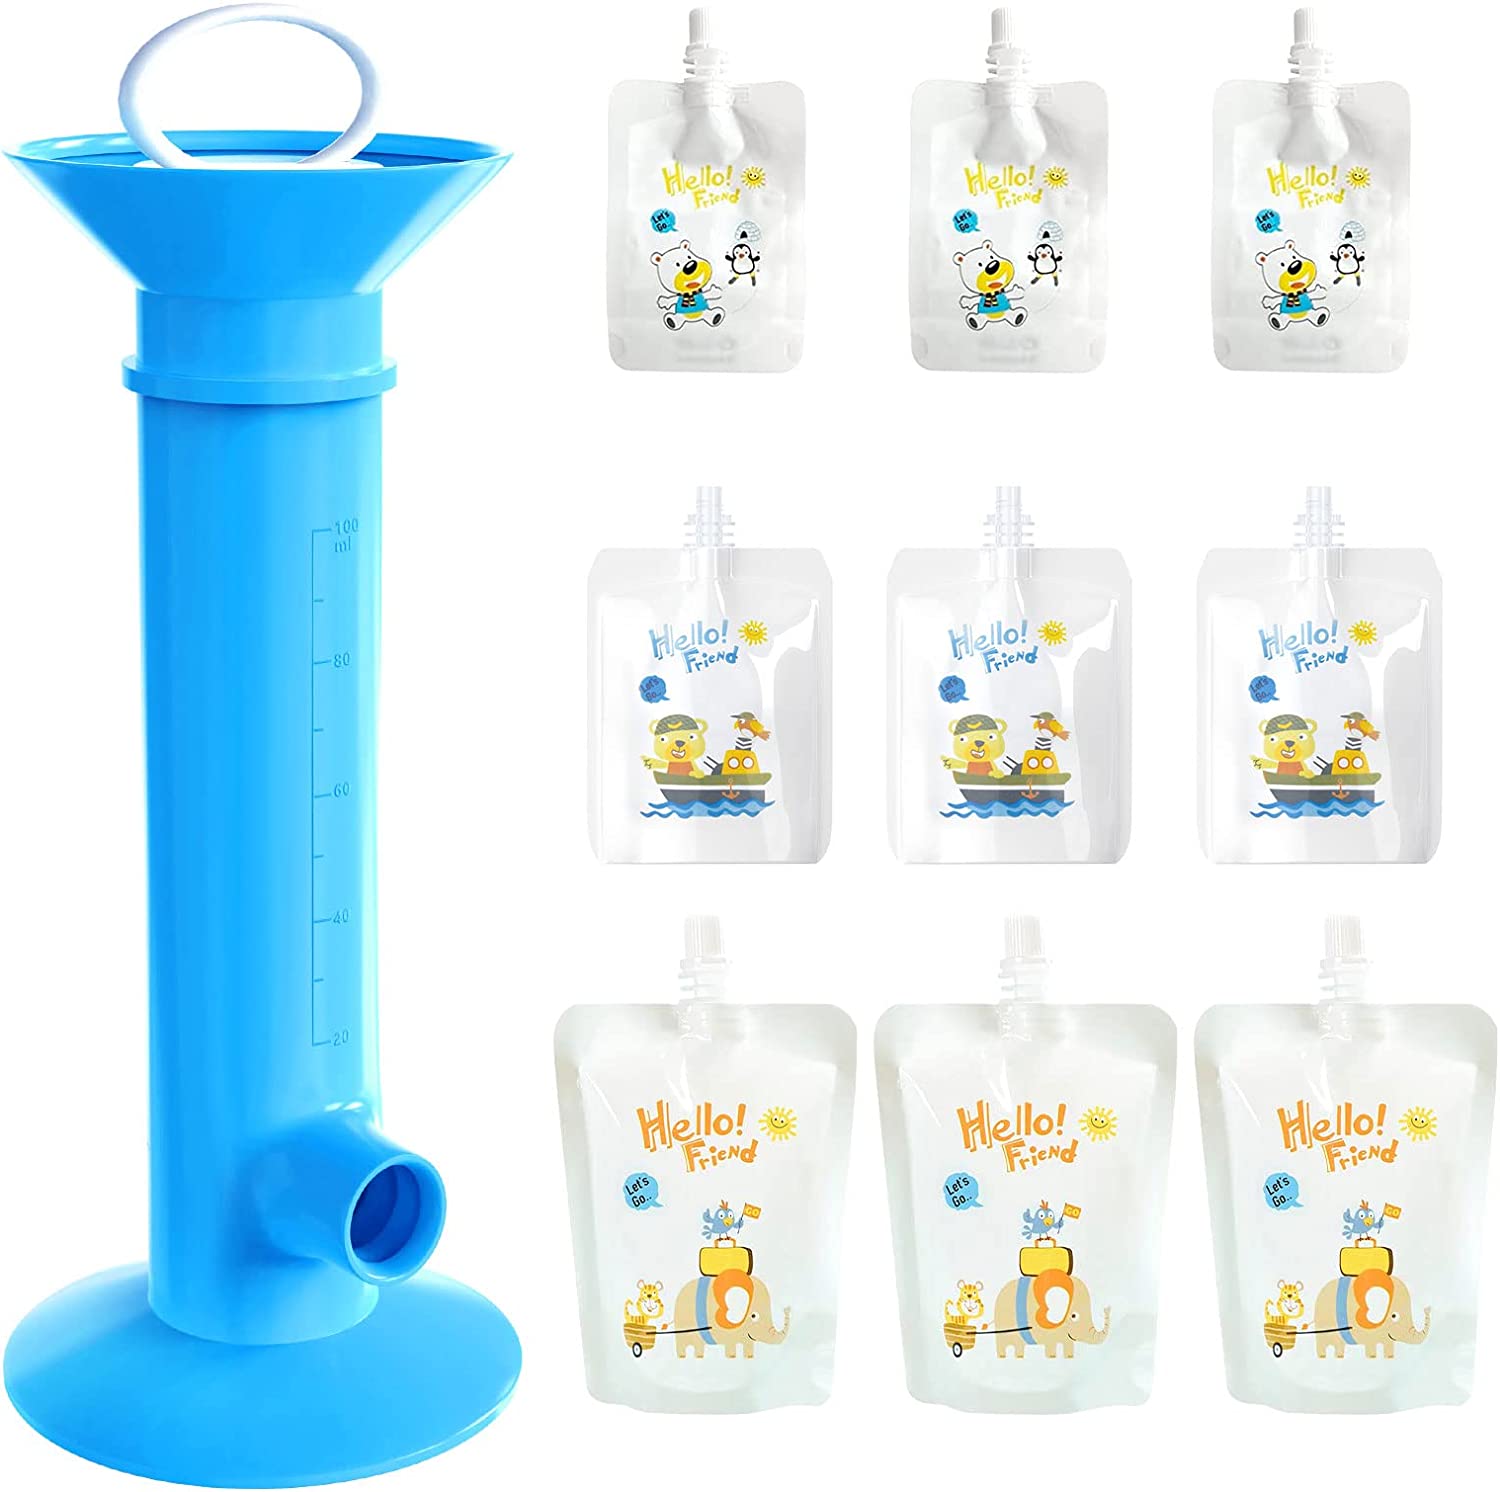 Chainplus Baby Food Pouch Filler Set, Fruit Puree Pouch Filling Station, Squeeze Station Baby Food Pouch Maker, Safe and Portable, for Babies and Toddlers, 9 Pouches for Free (Blue) - image 1 of 7